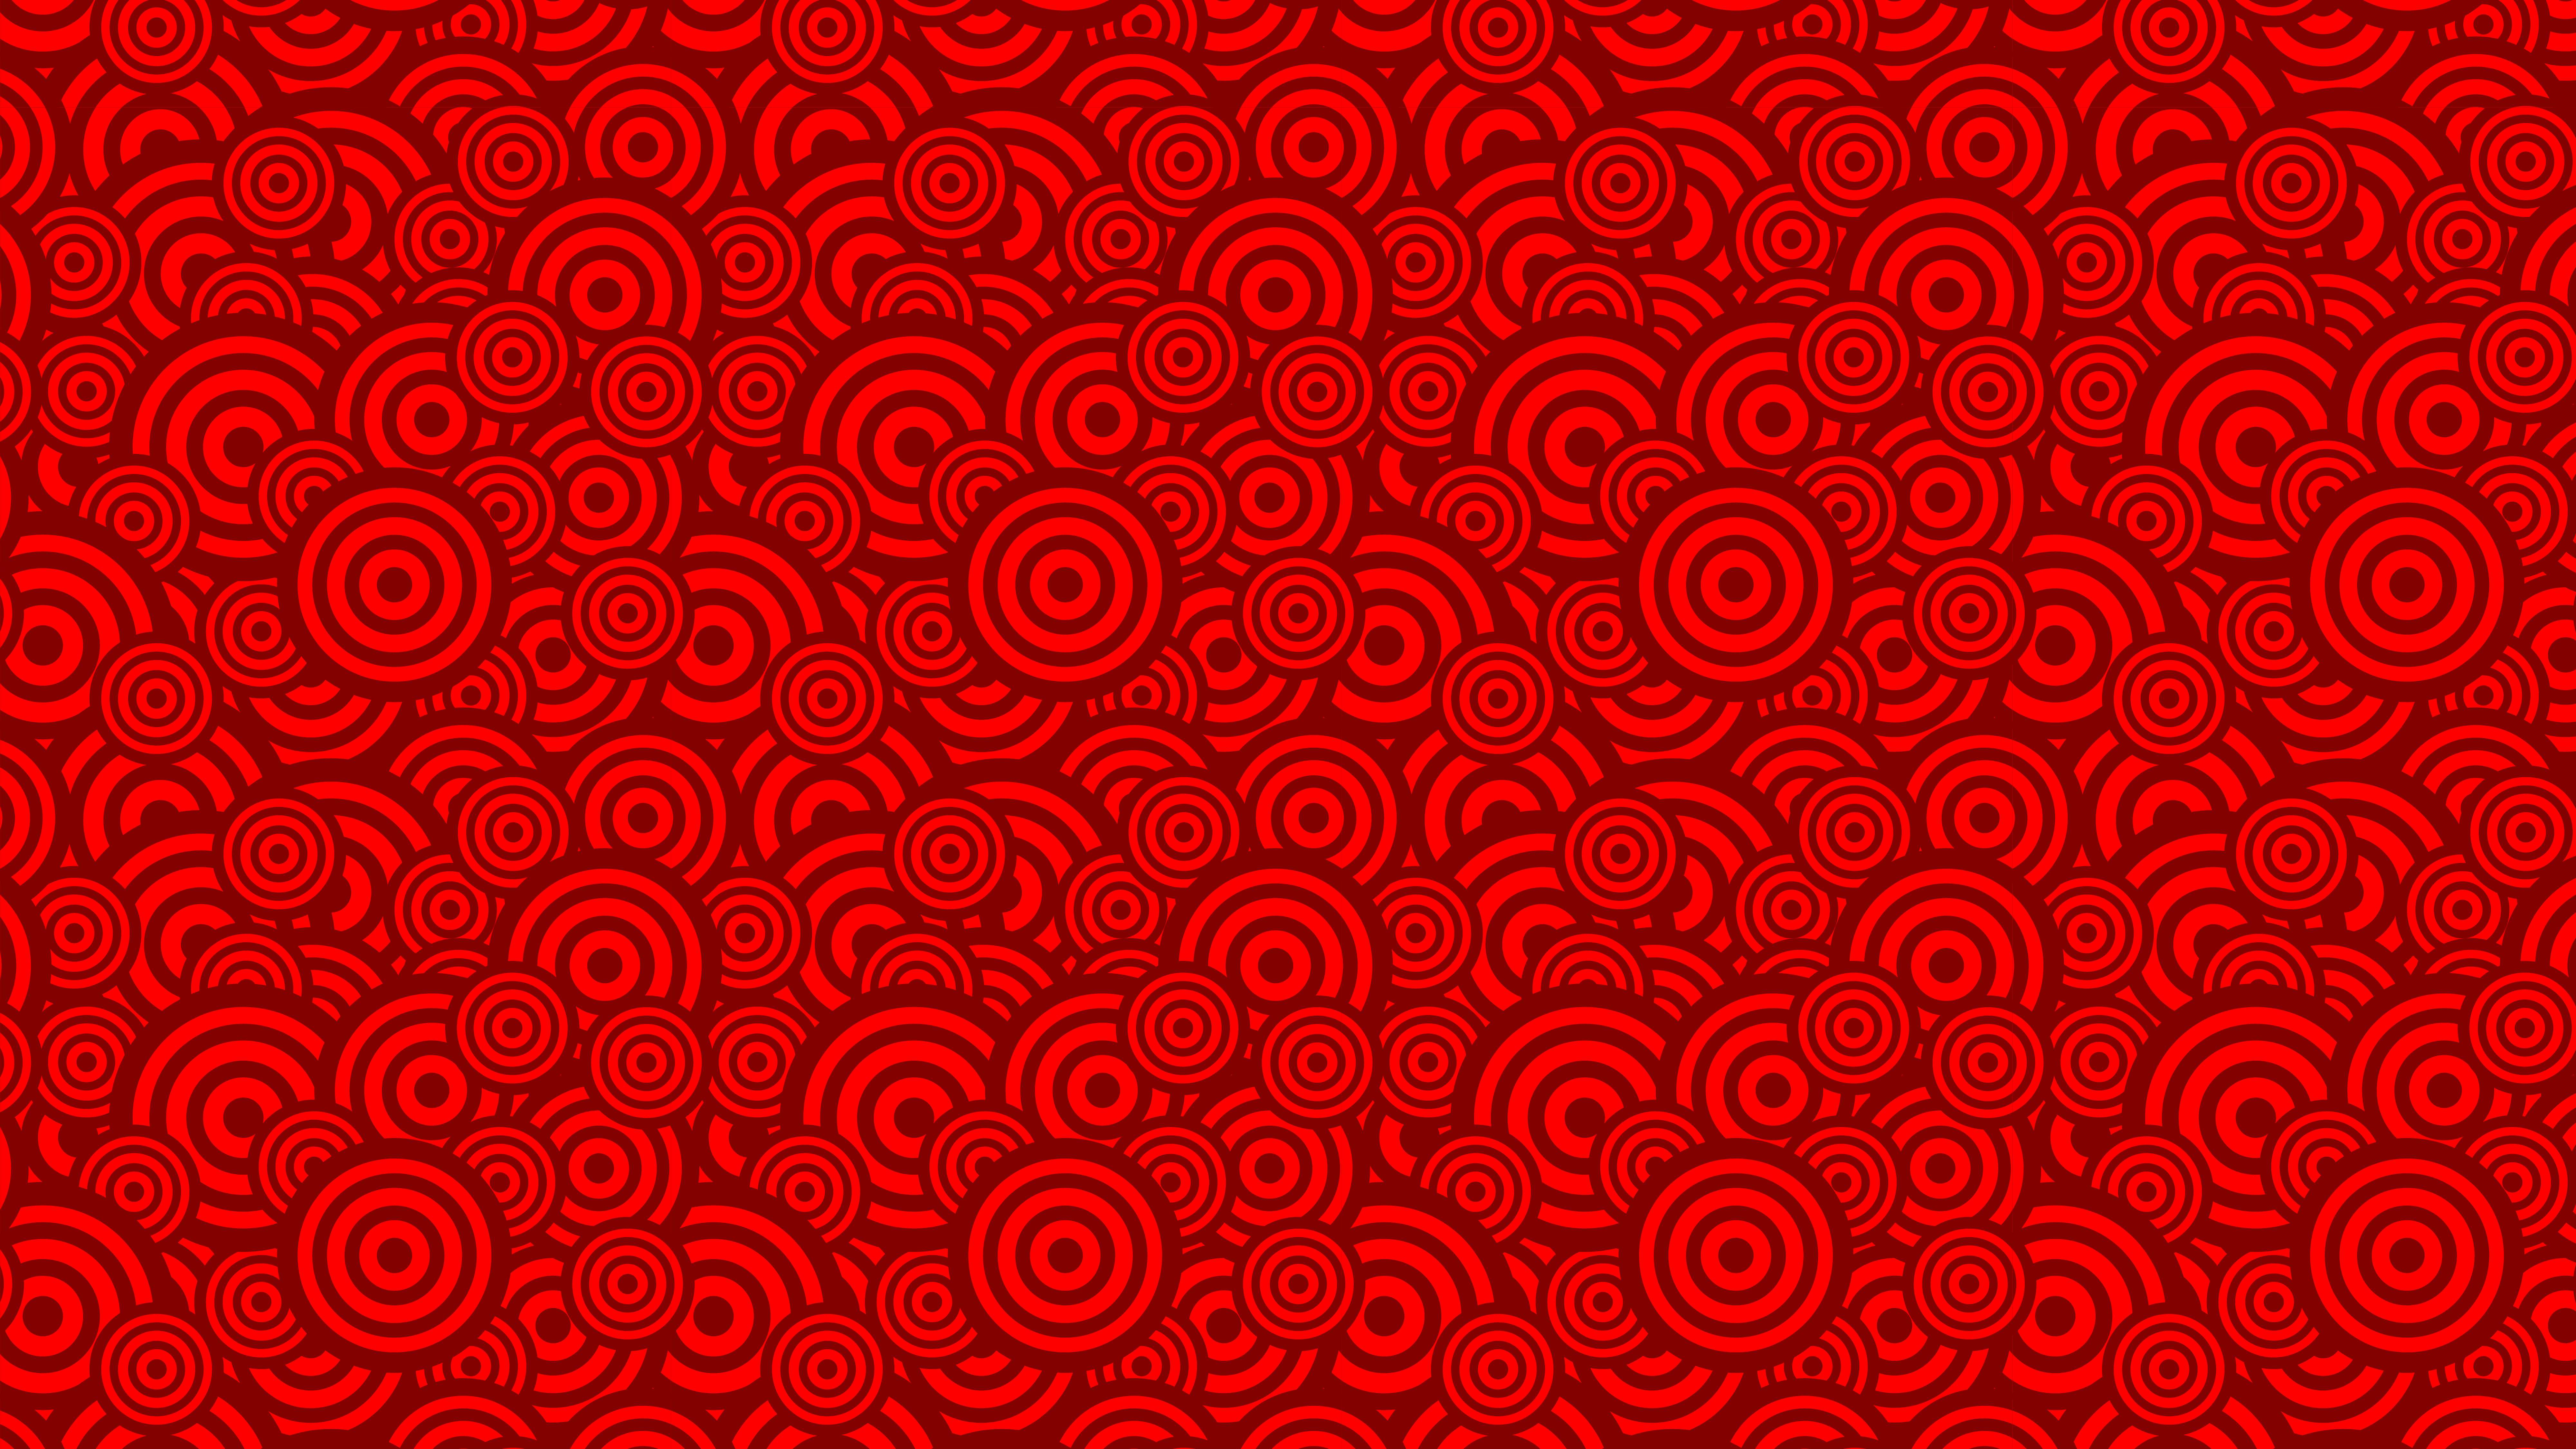 Free Red Seamless Geometric Overlapping Concentric Circles Pattern